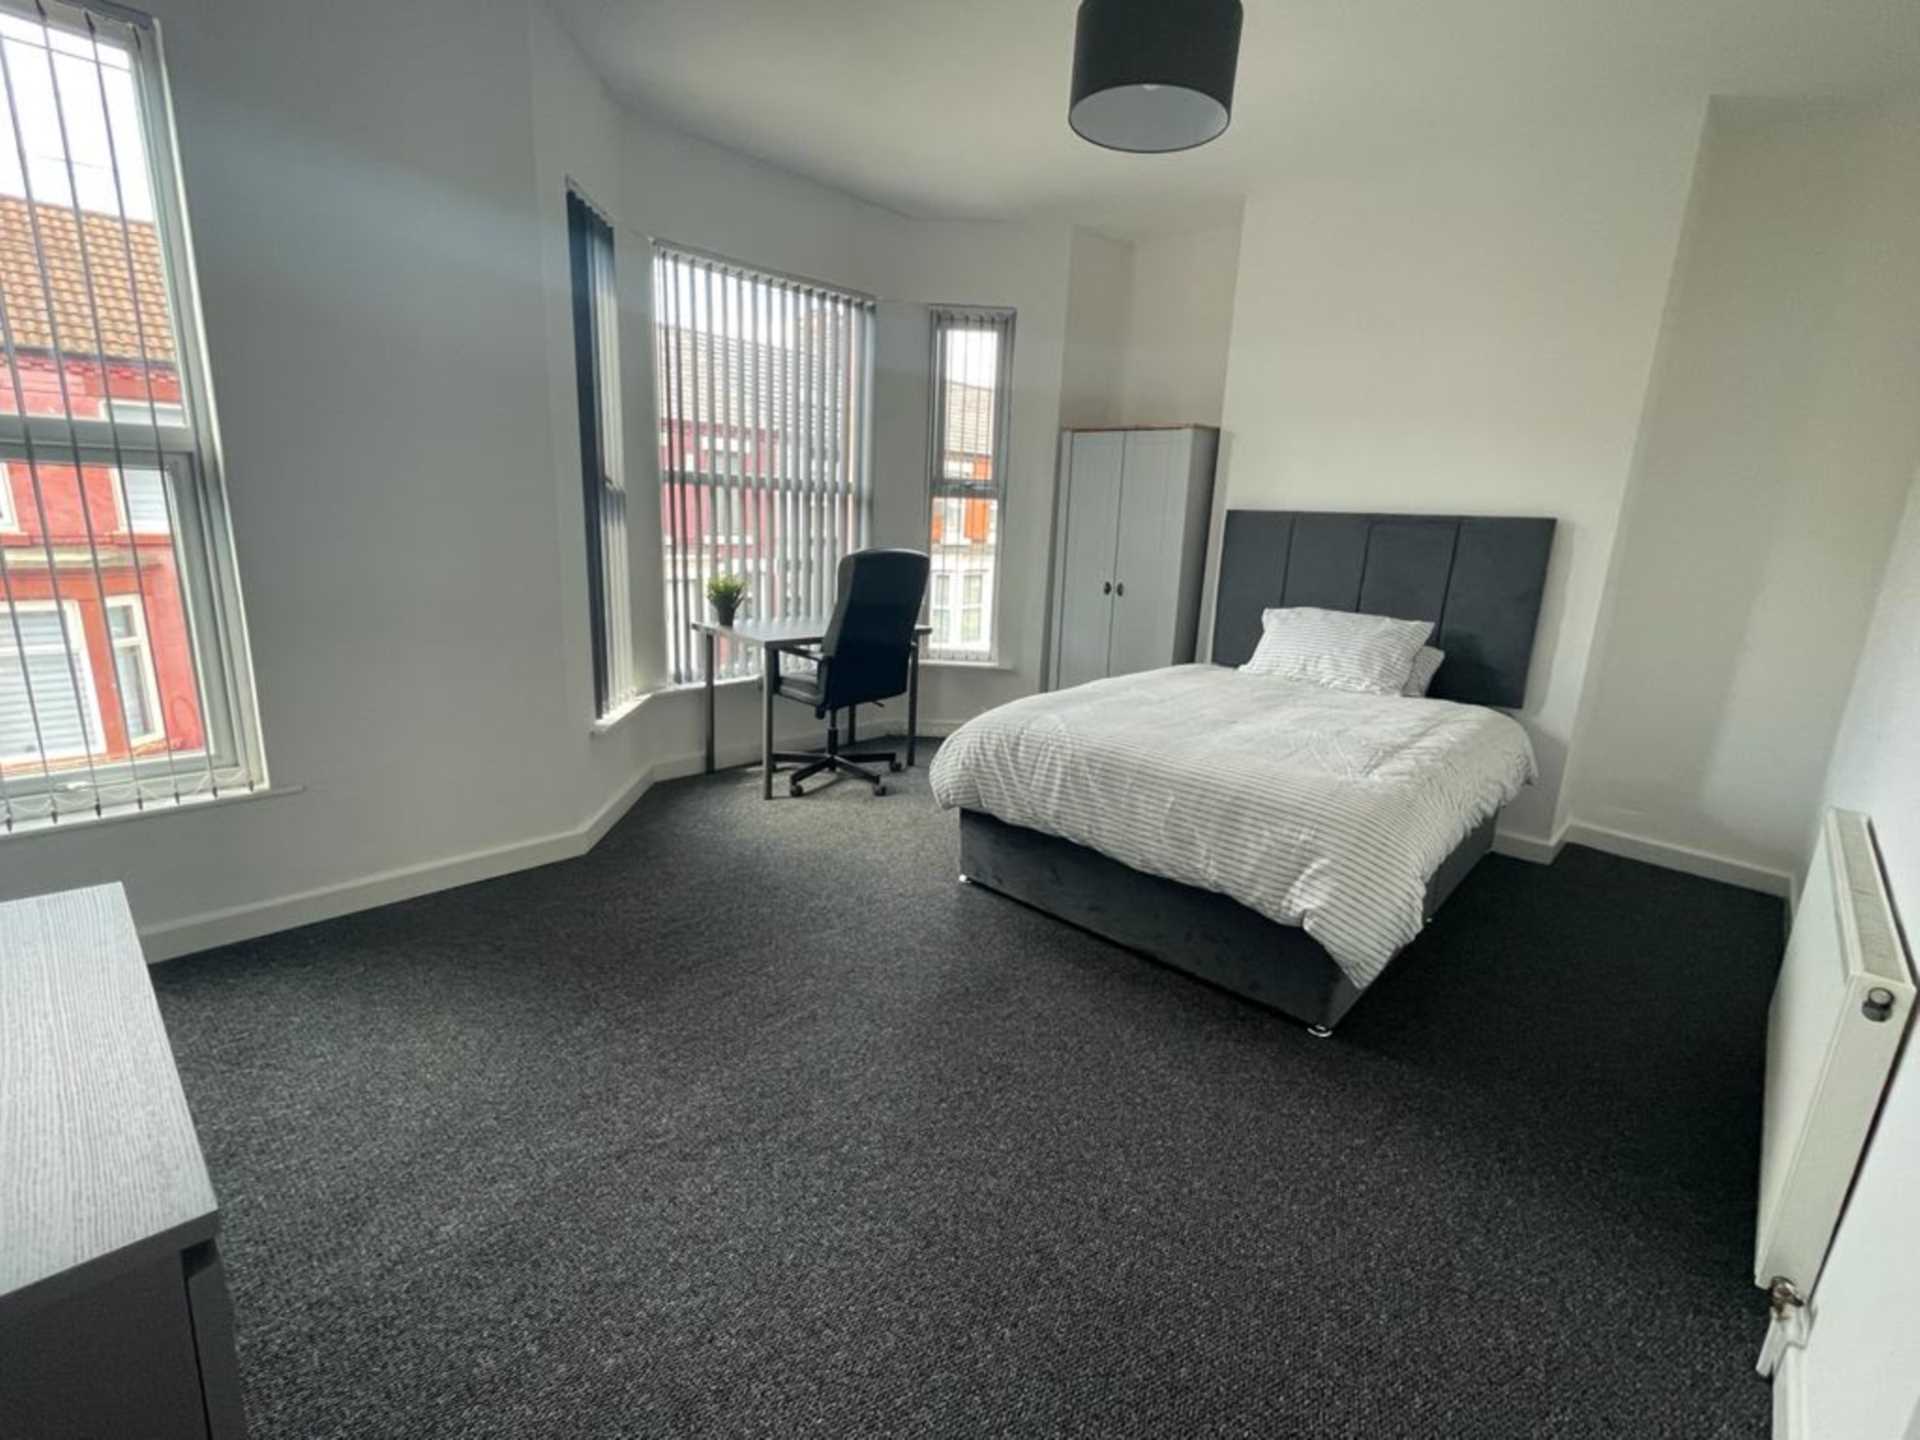 Thornycroft Road, Wavertree - 1 ROOM AVAILABLE - STUDENT ROOM, Image 1